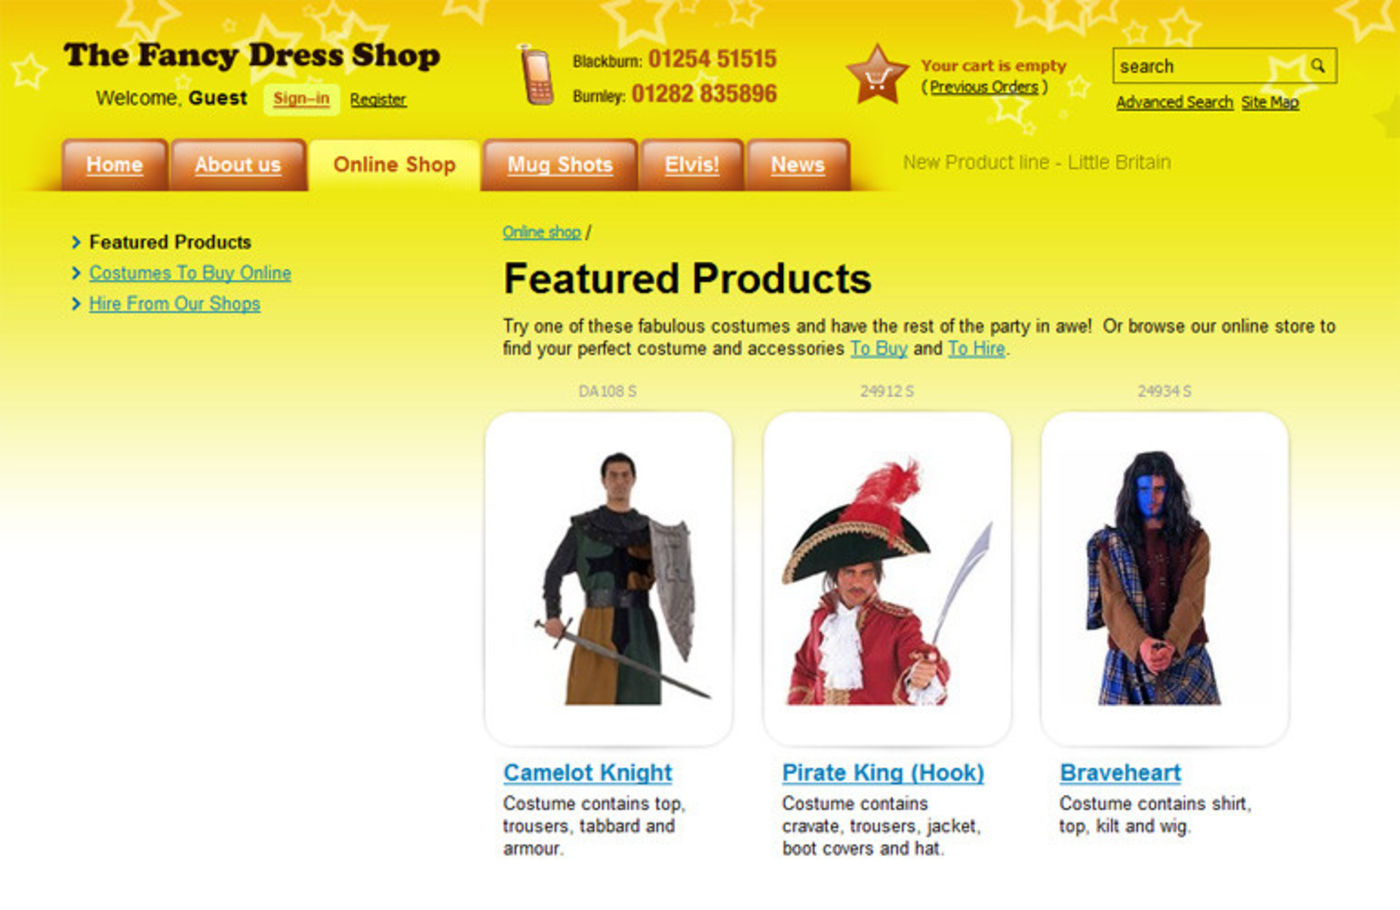 The Fancy Dress Shop Featured Products